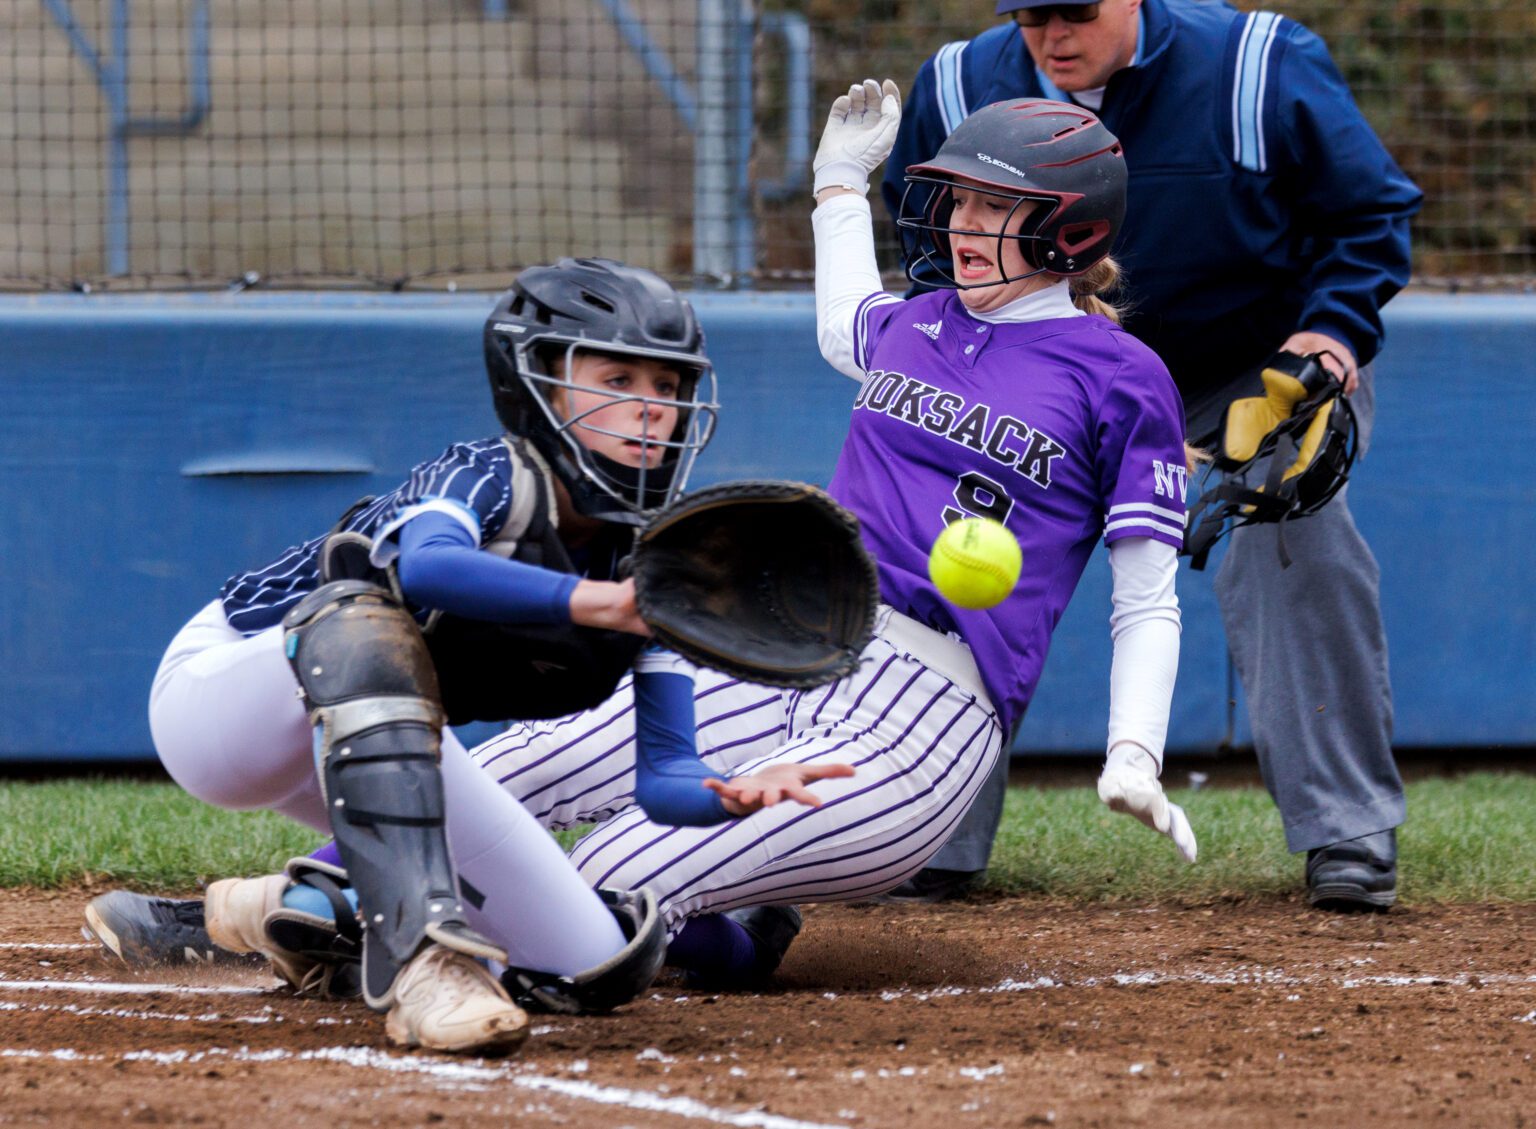 Nooksack Valley’s Lainey Kimball slides into home plate ahead of the throw March 23 as the Pioneers held a 5-0 lead in the third inning against Lynden Christian before the game rained out.